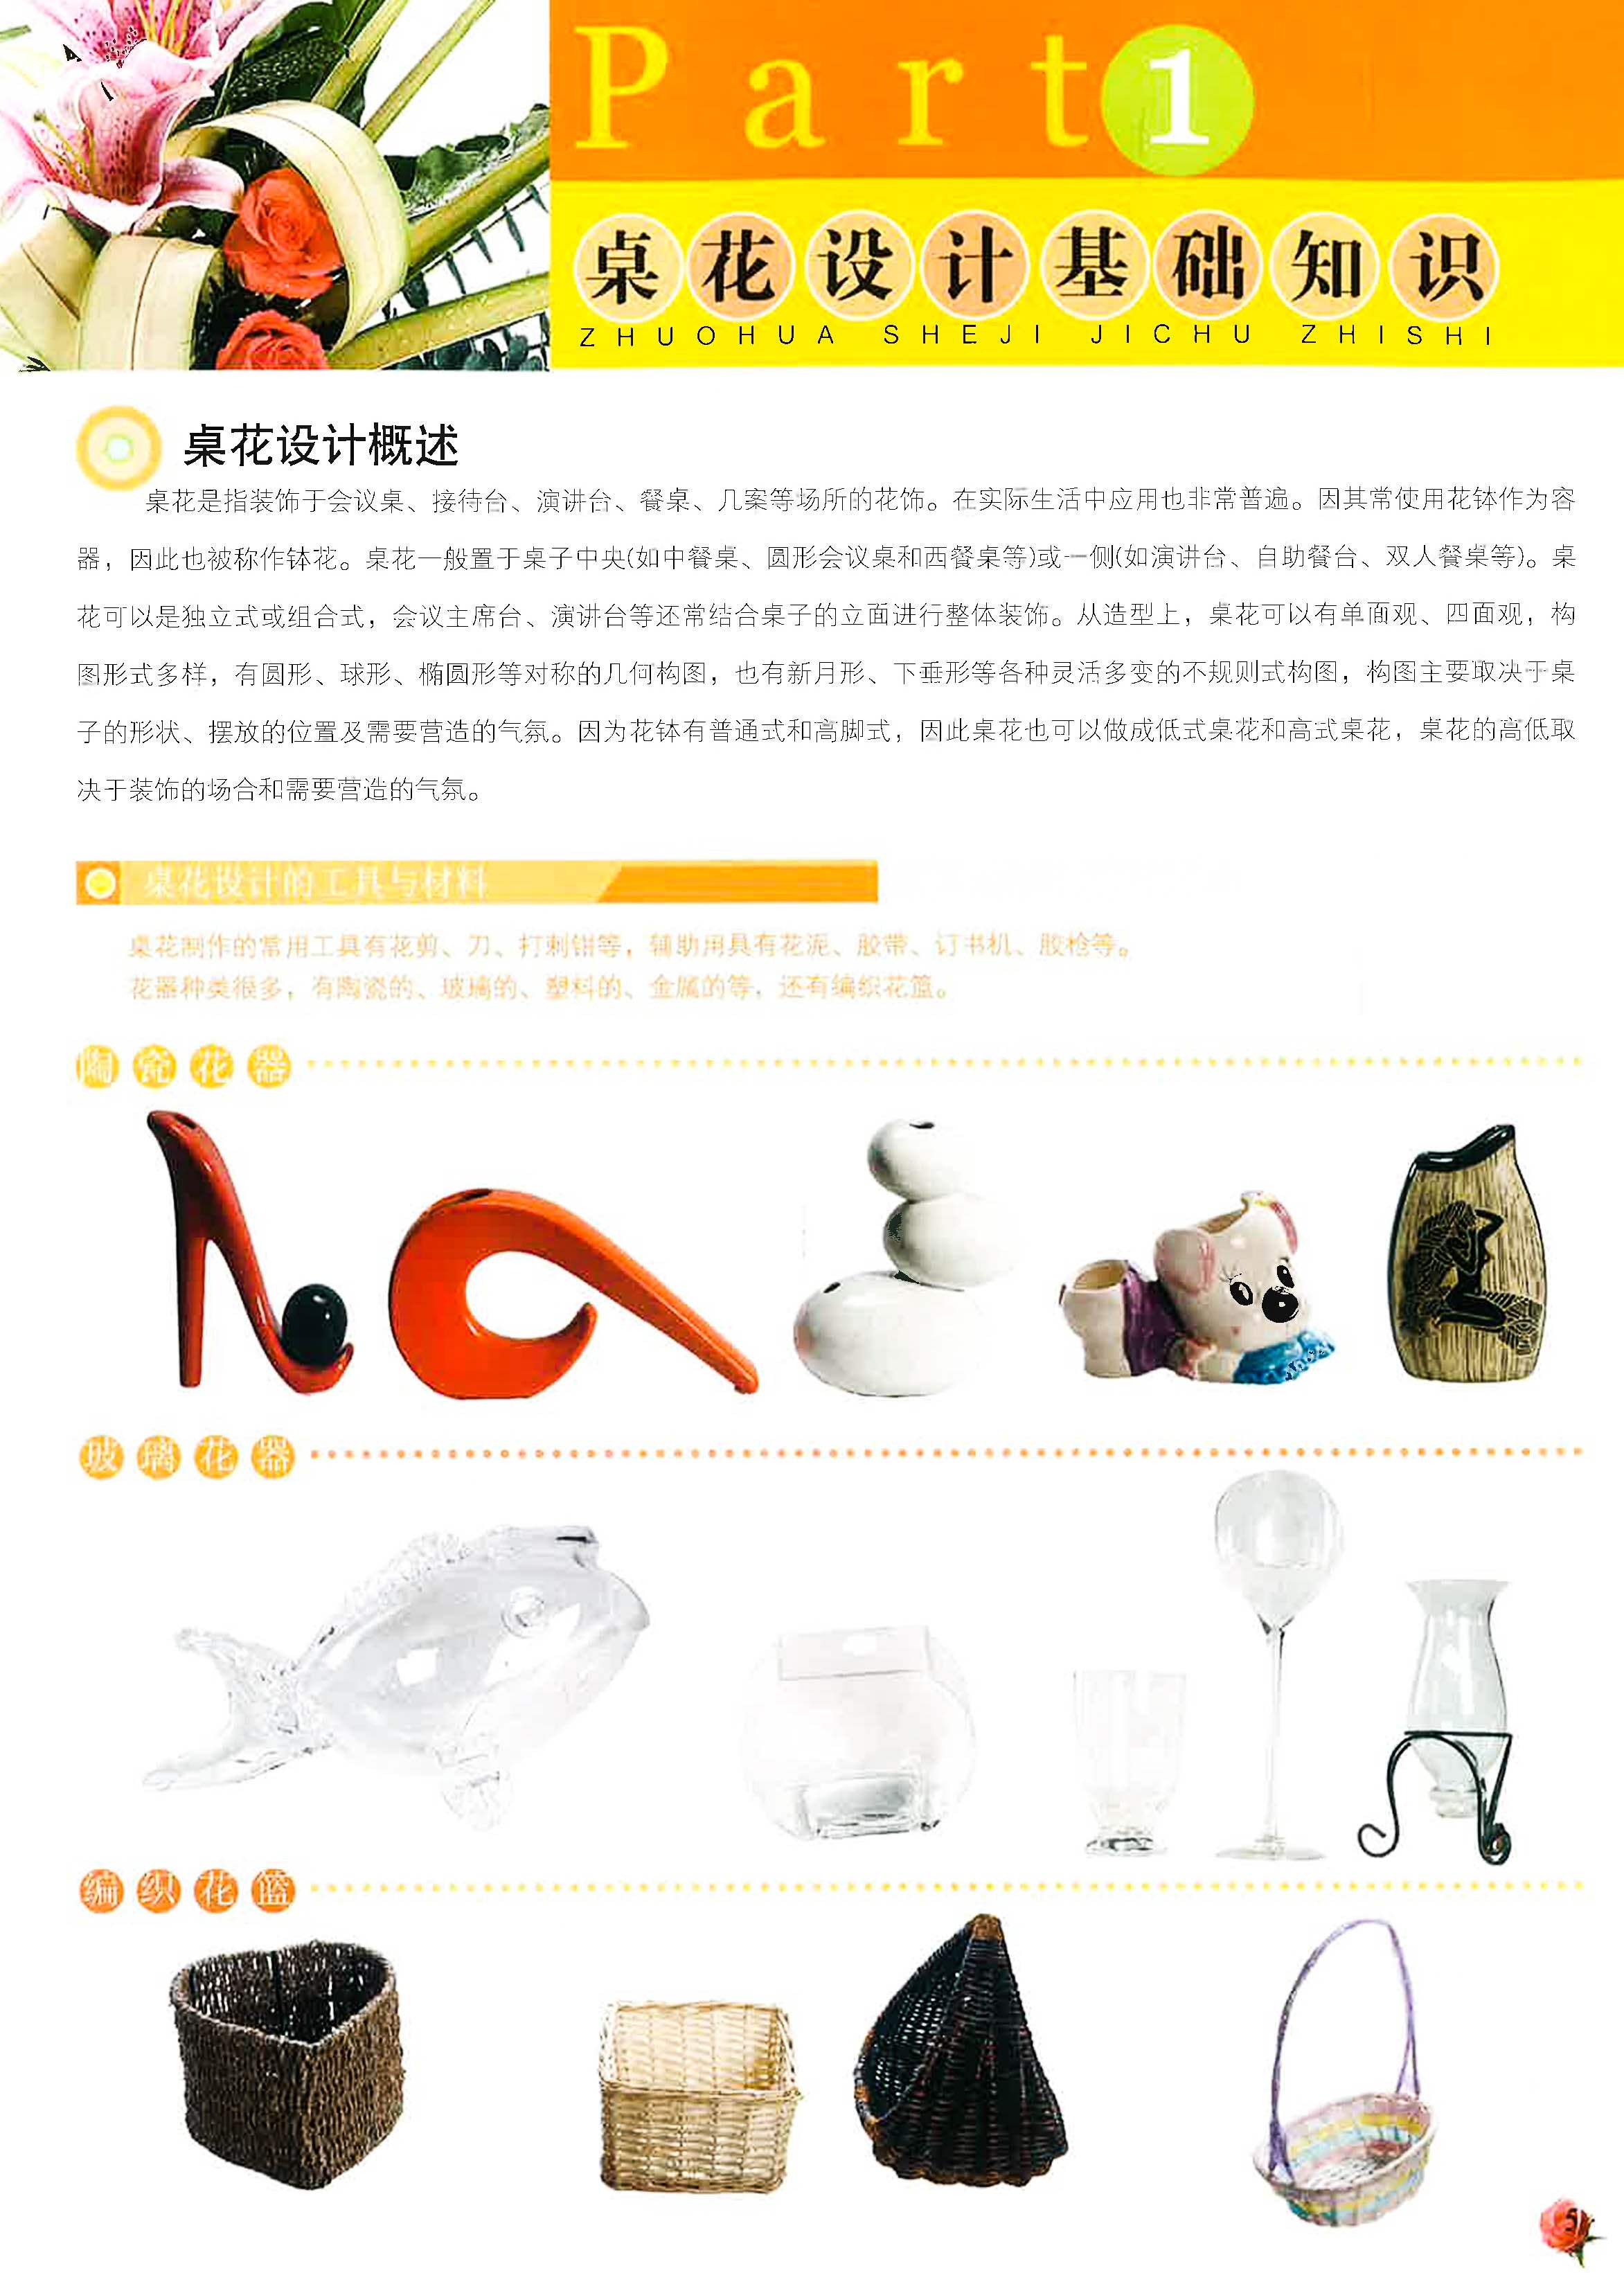 Translation missing: en.sections.featured_product.gallery_thumbnail_alt
